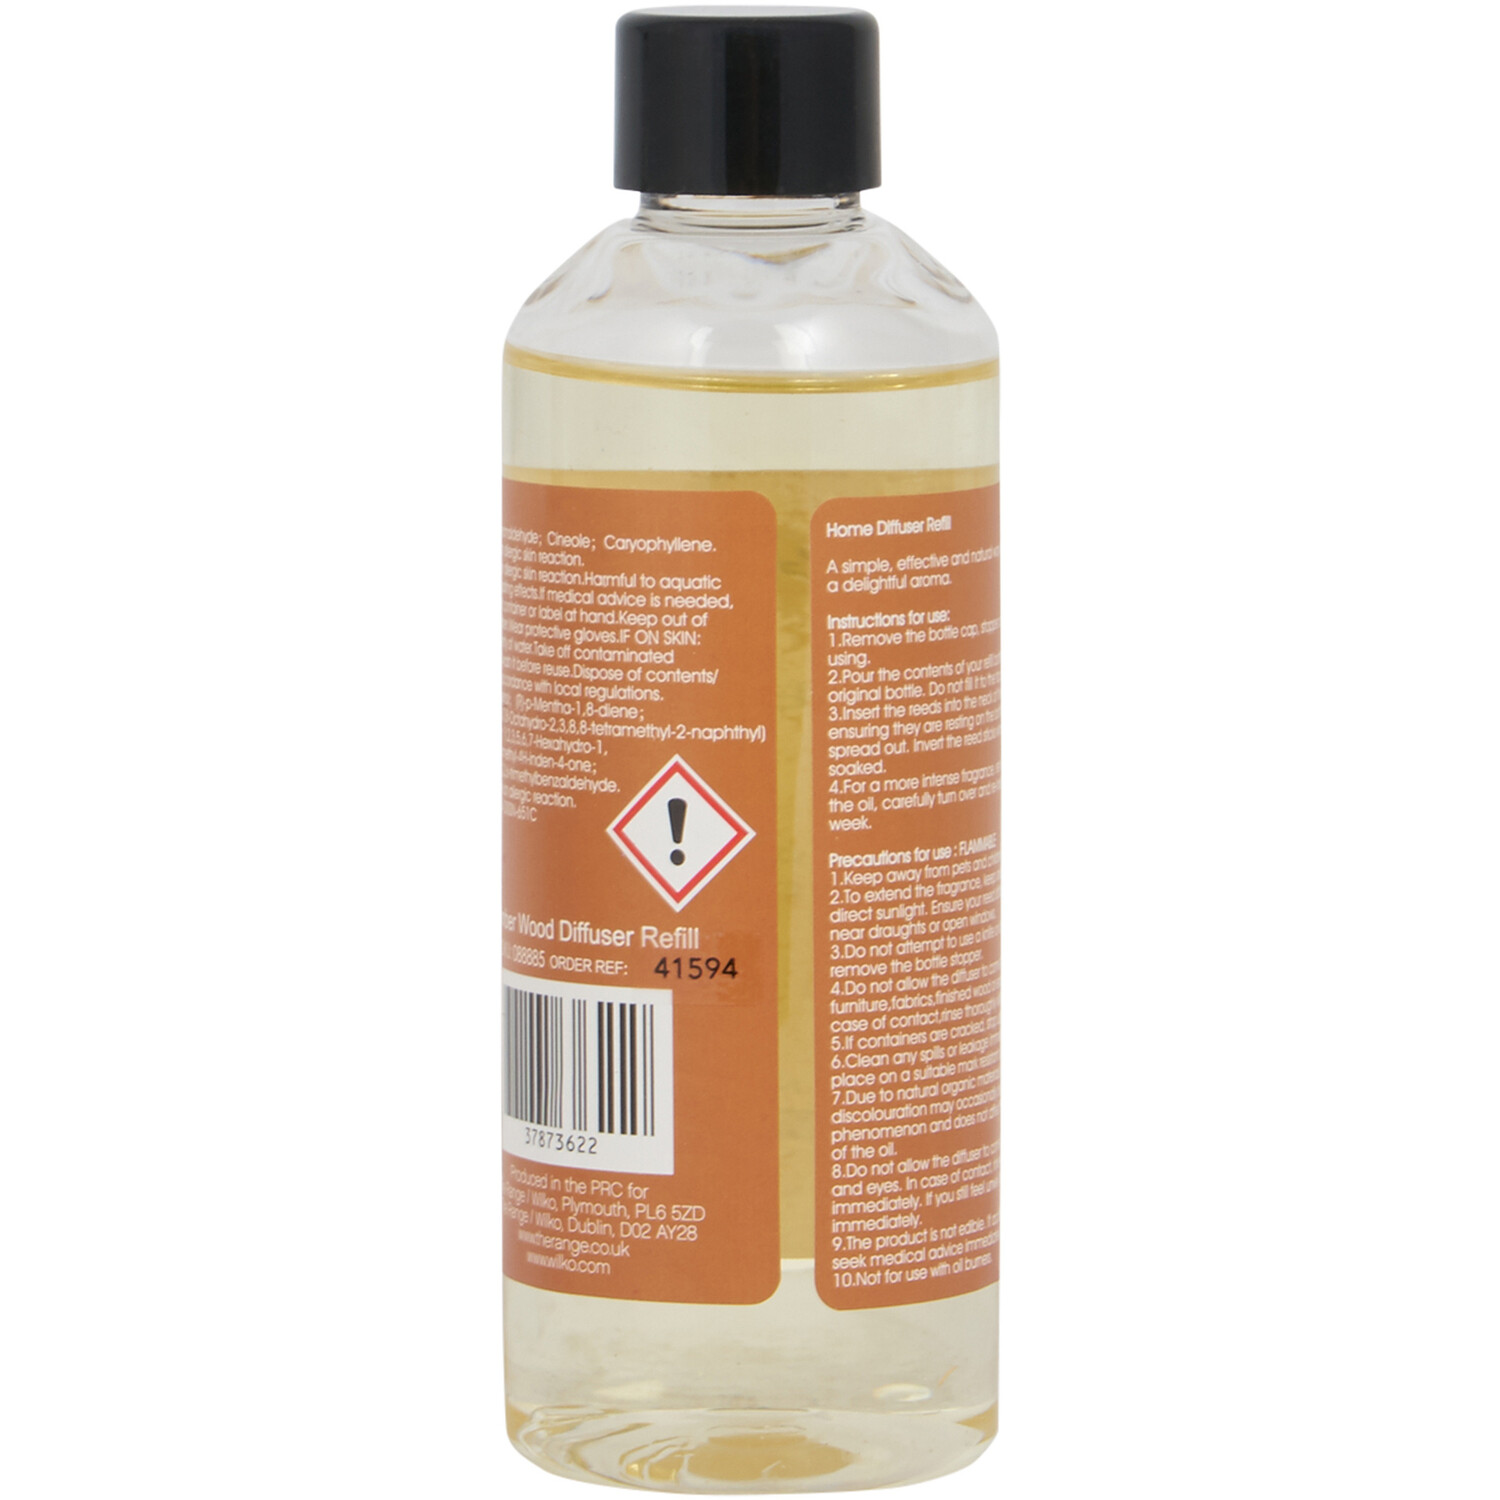 Reed Diffuser Refill 200ml - Amber Wood Image 2